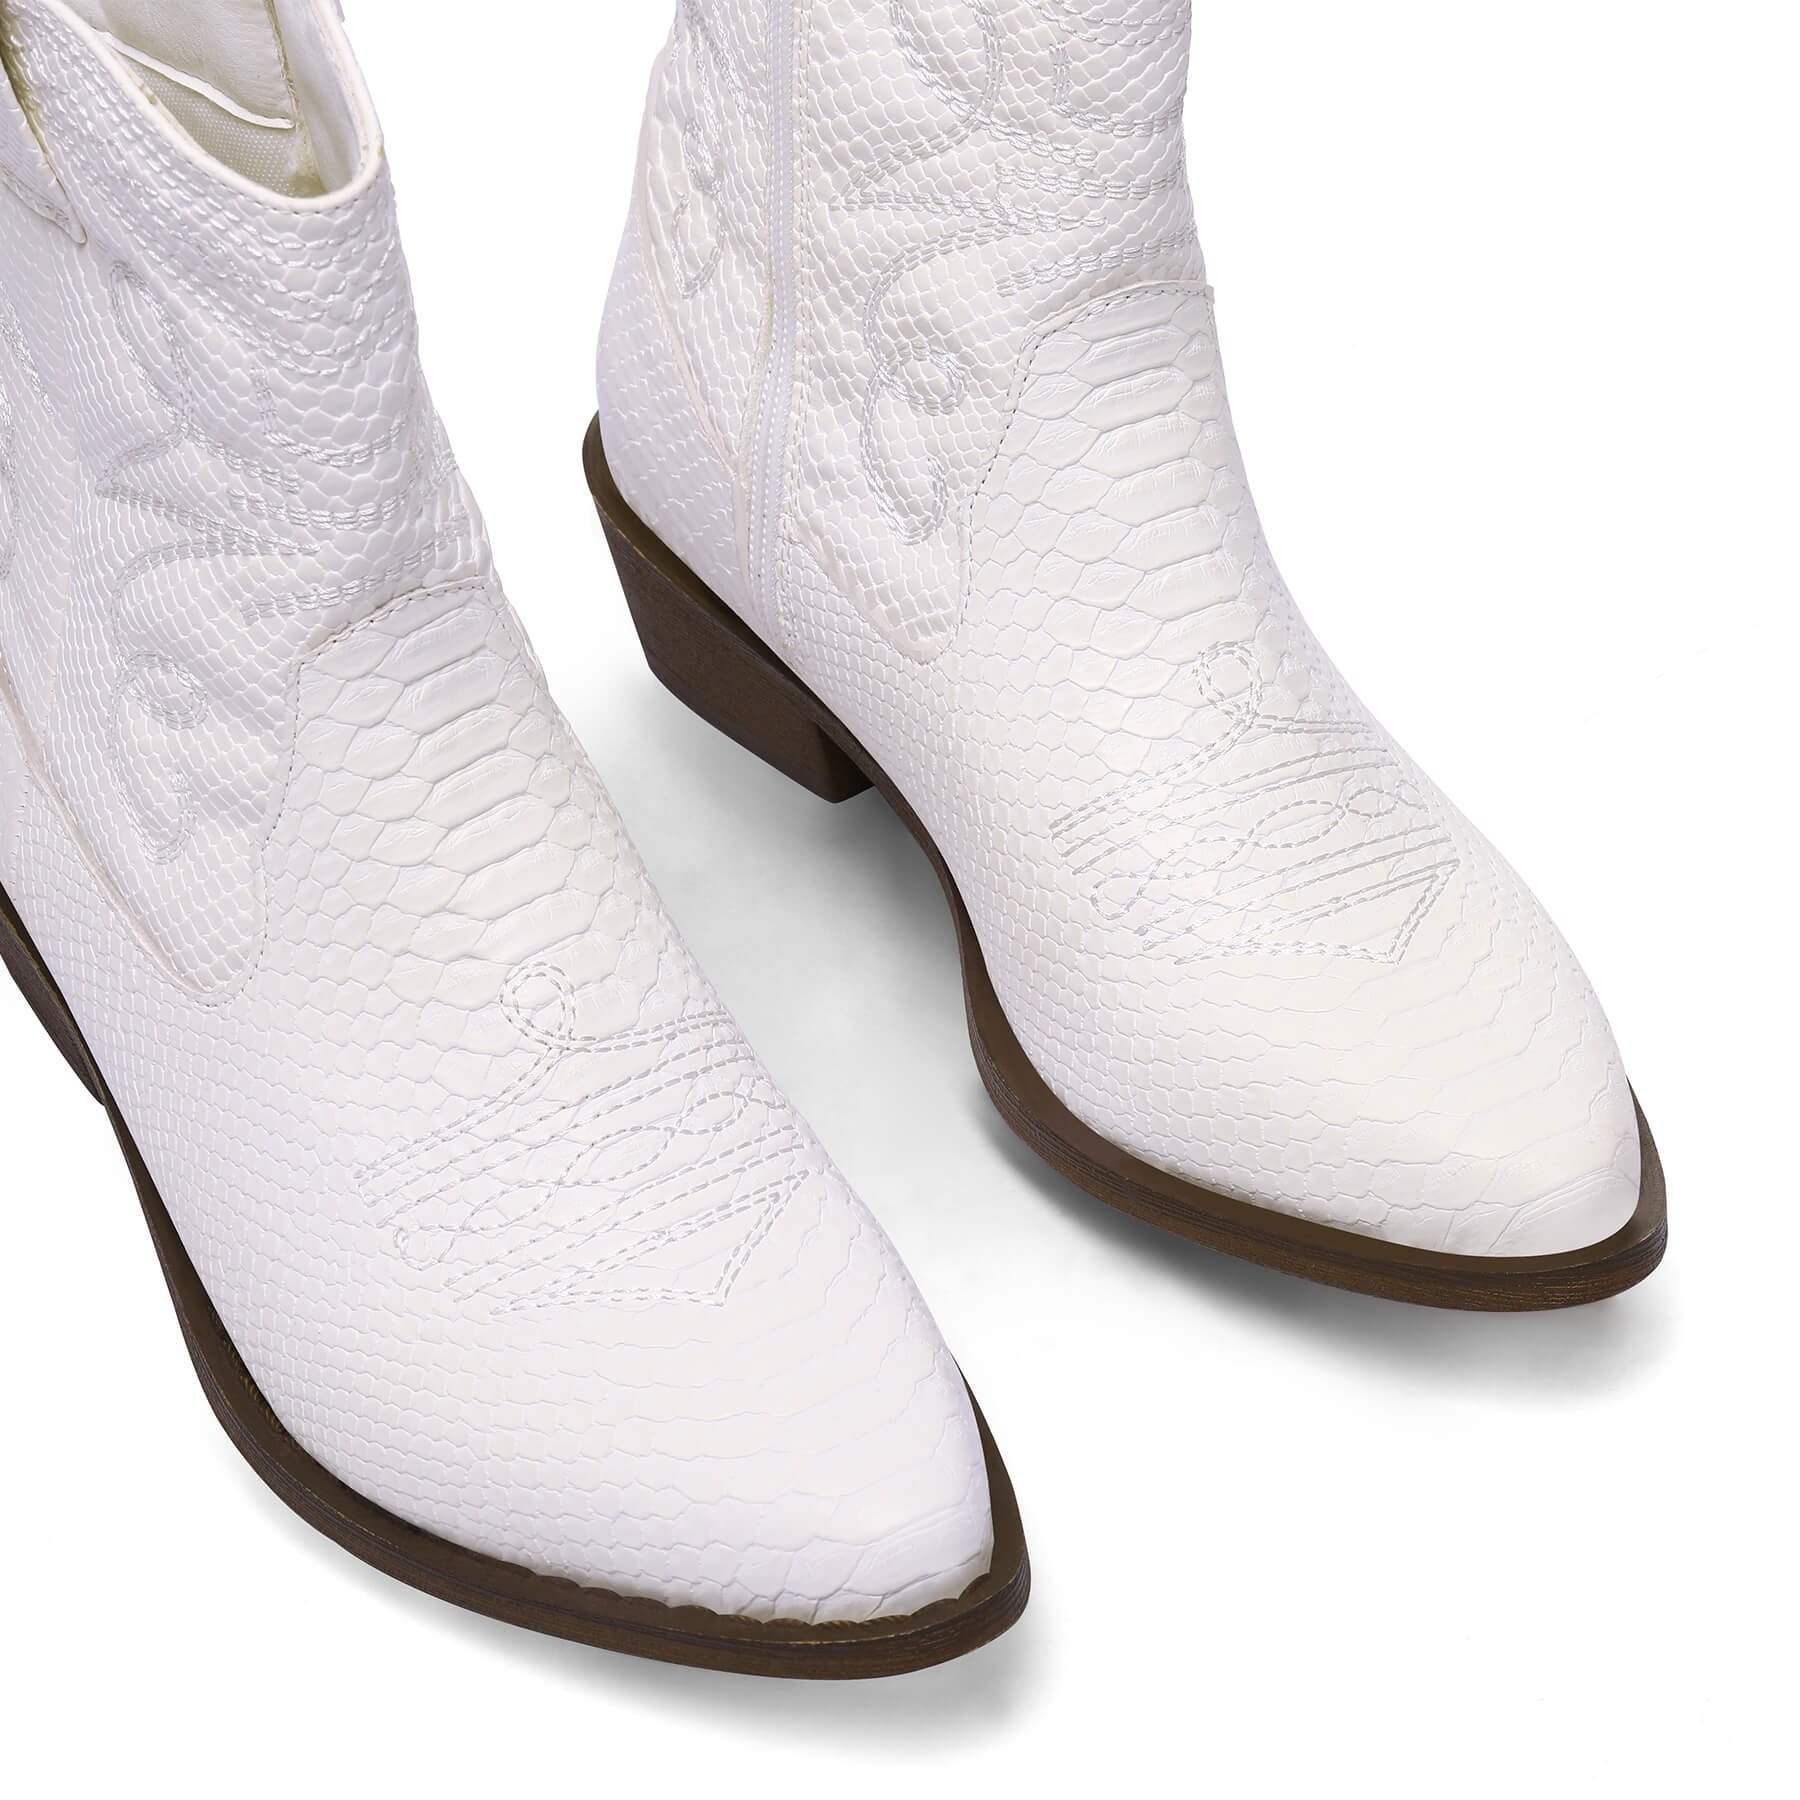 Fashion Low Heel Western Cowgirl White Boots